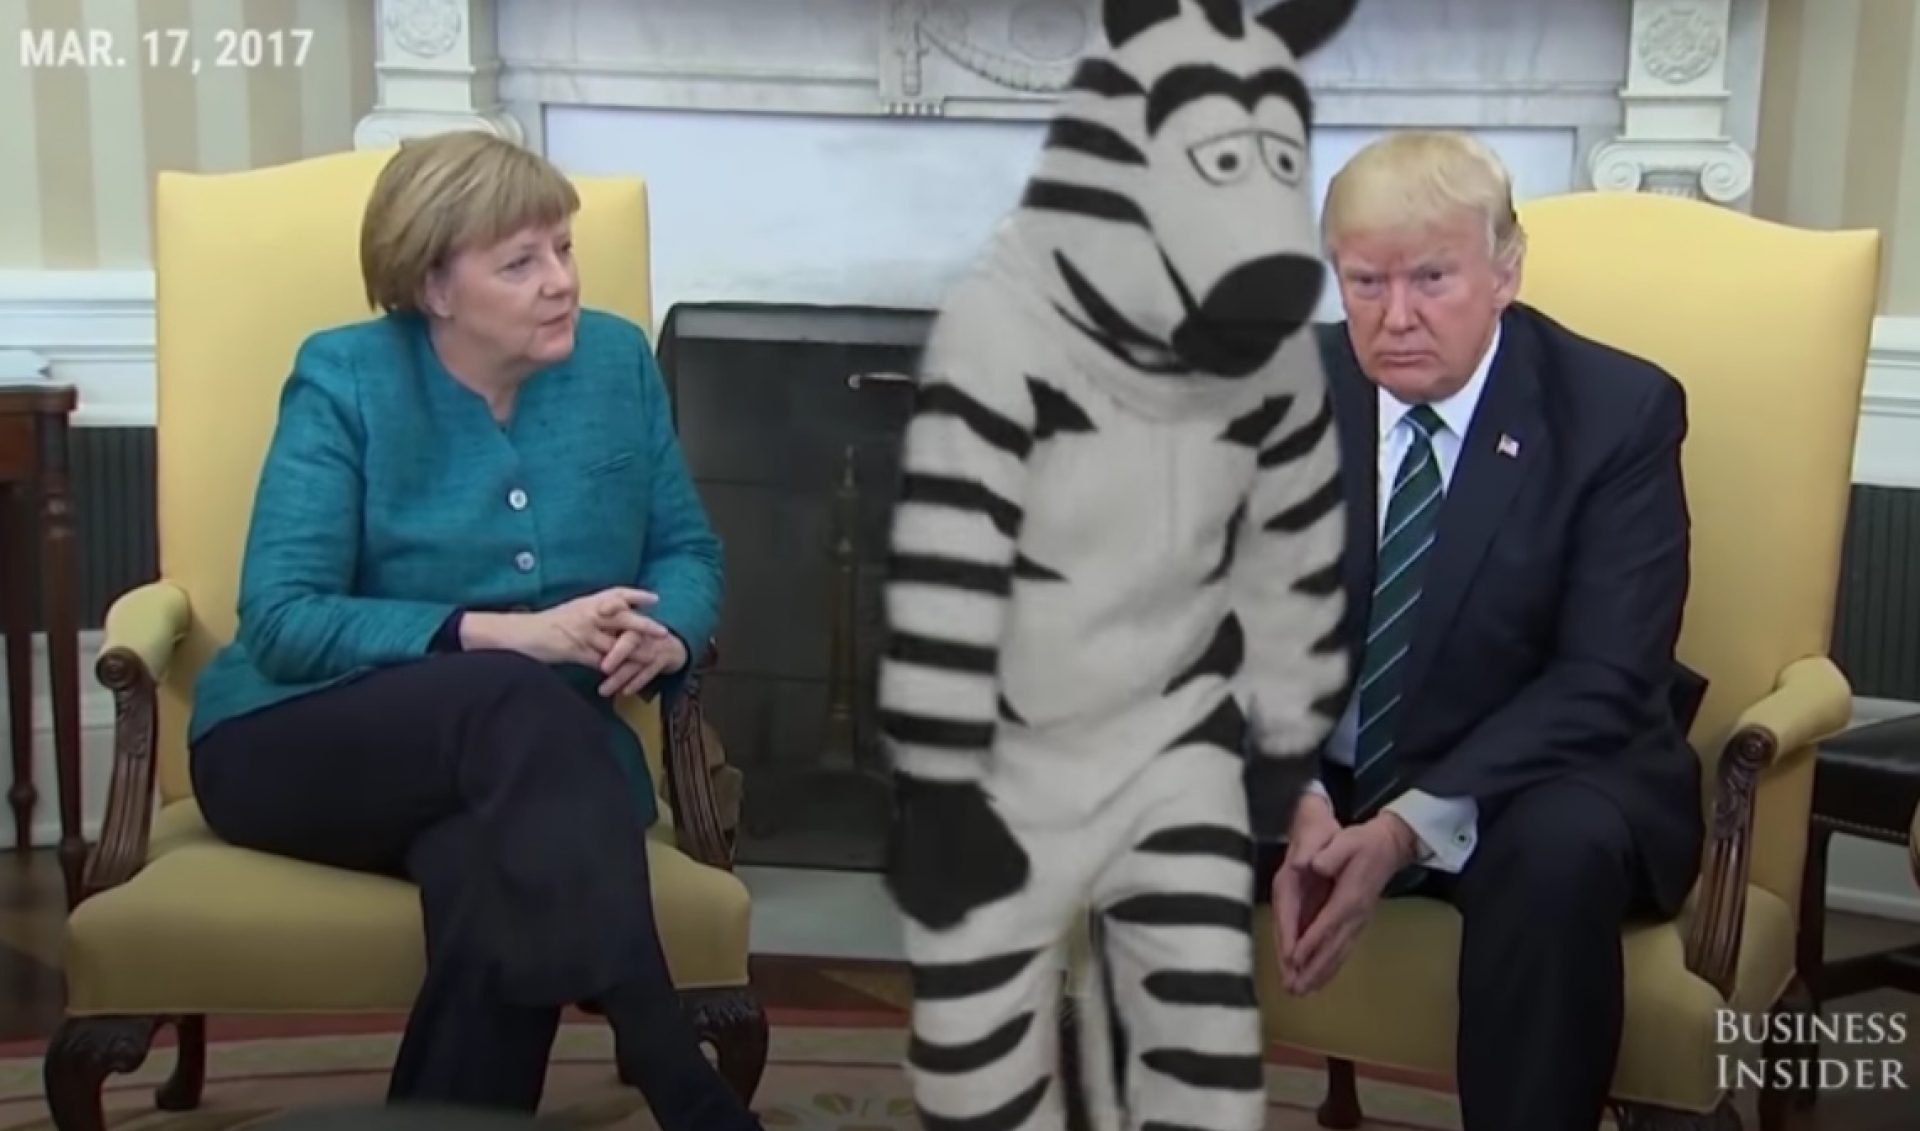 John Oliver Uses Silent 22-Minute Video To Add Dancing Zebras To The News